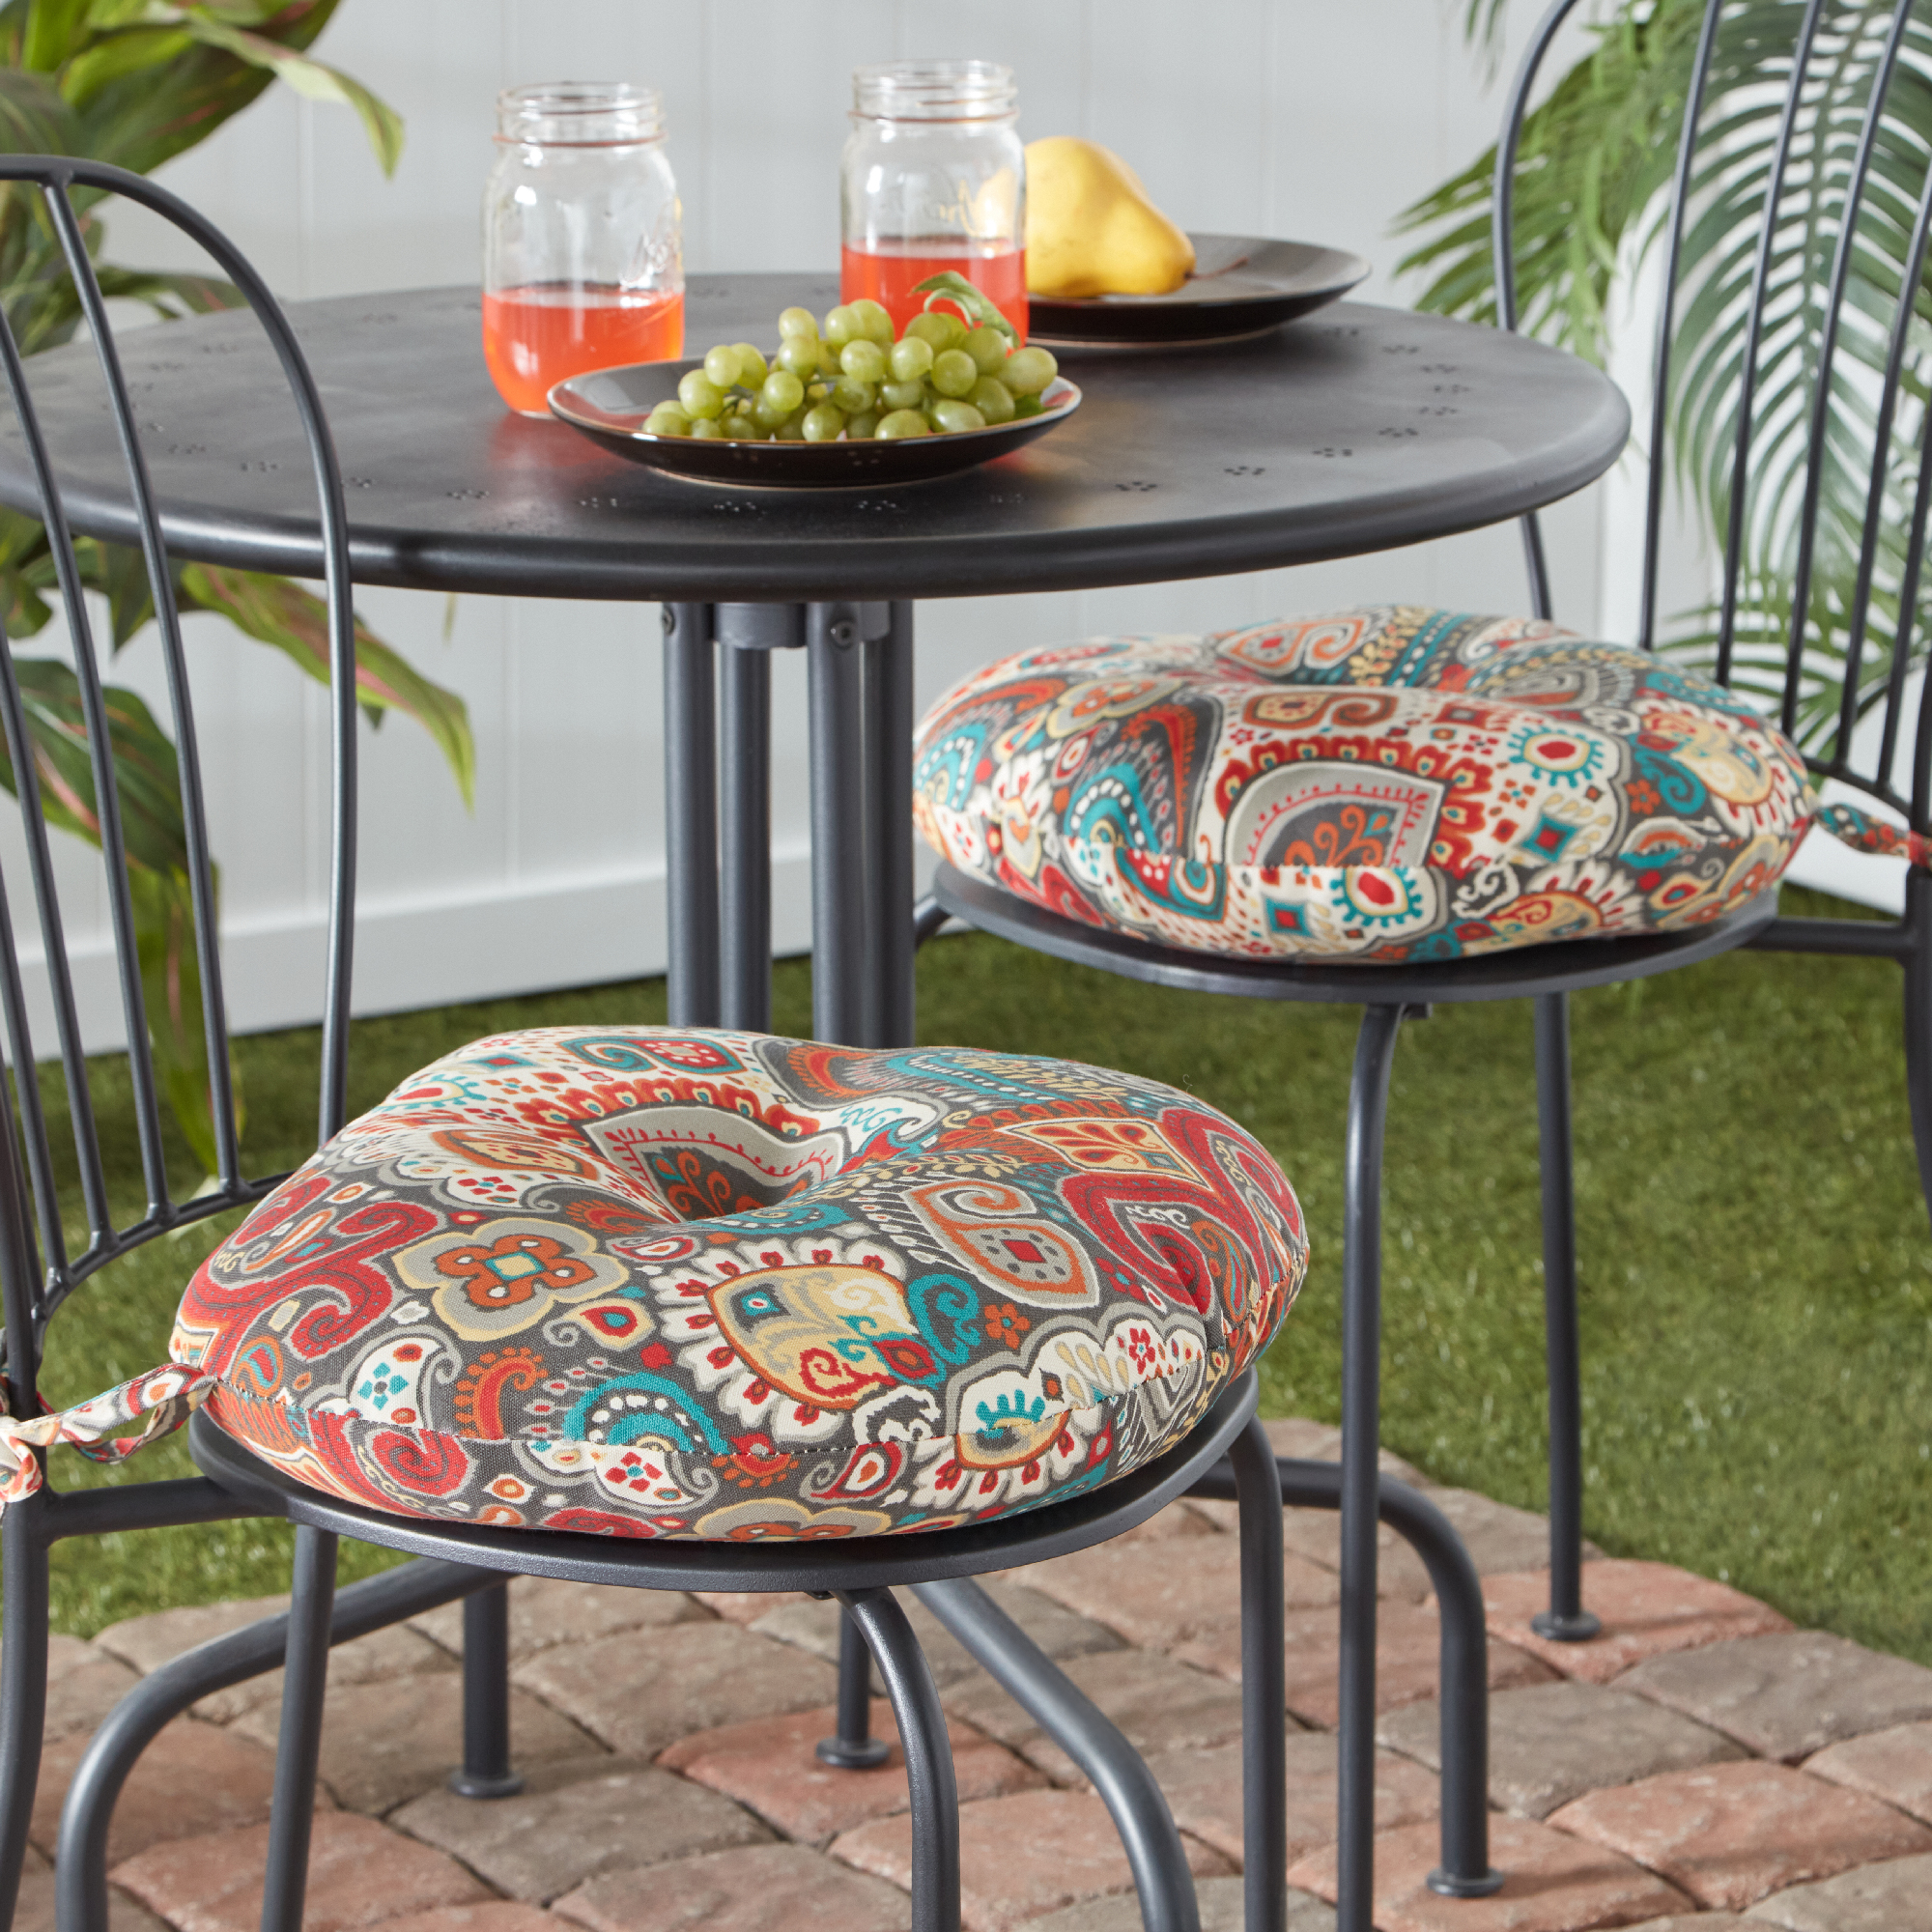 Greendale Home Fashions Asbury Park 15 in. Round Outdoor Reversible Bistro Seat Cushion (Set of 2) - image 3 of 7